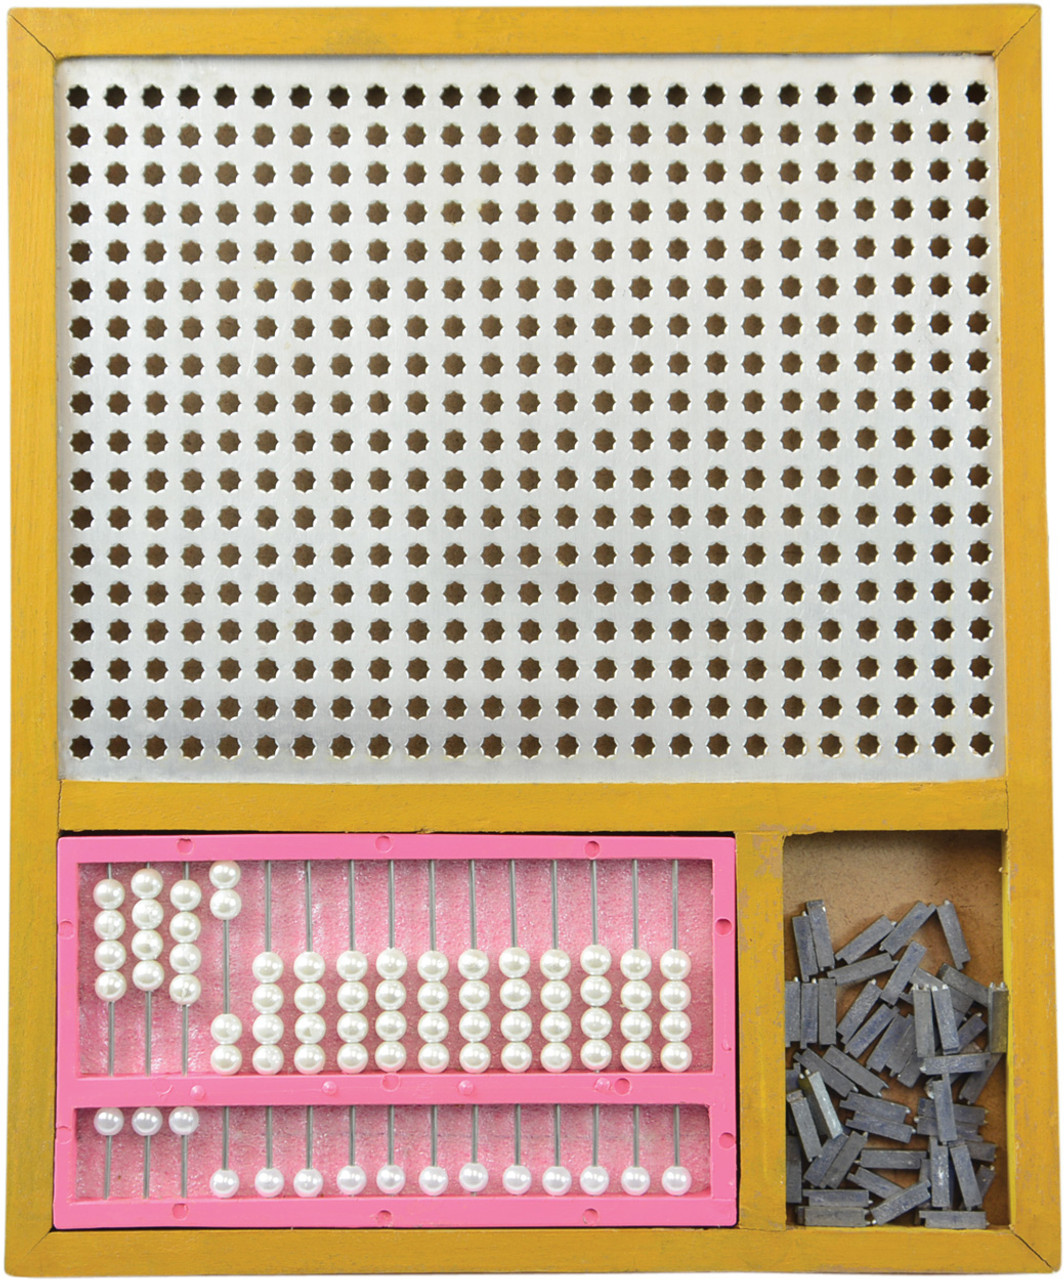 Combined Algebra Frame and 15 Row Abacus